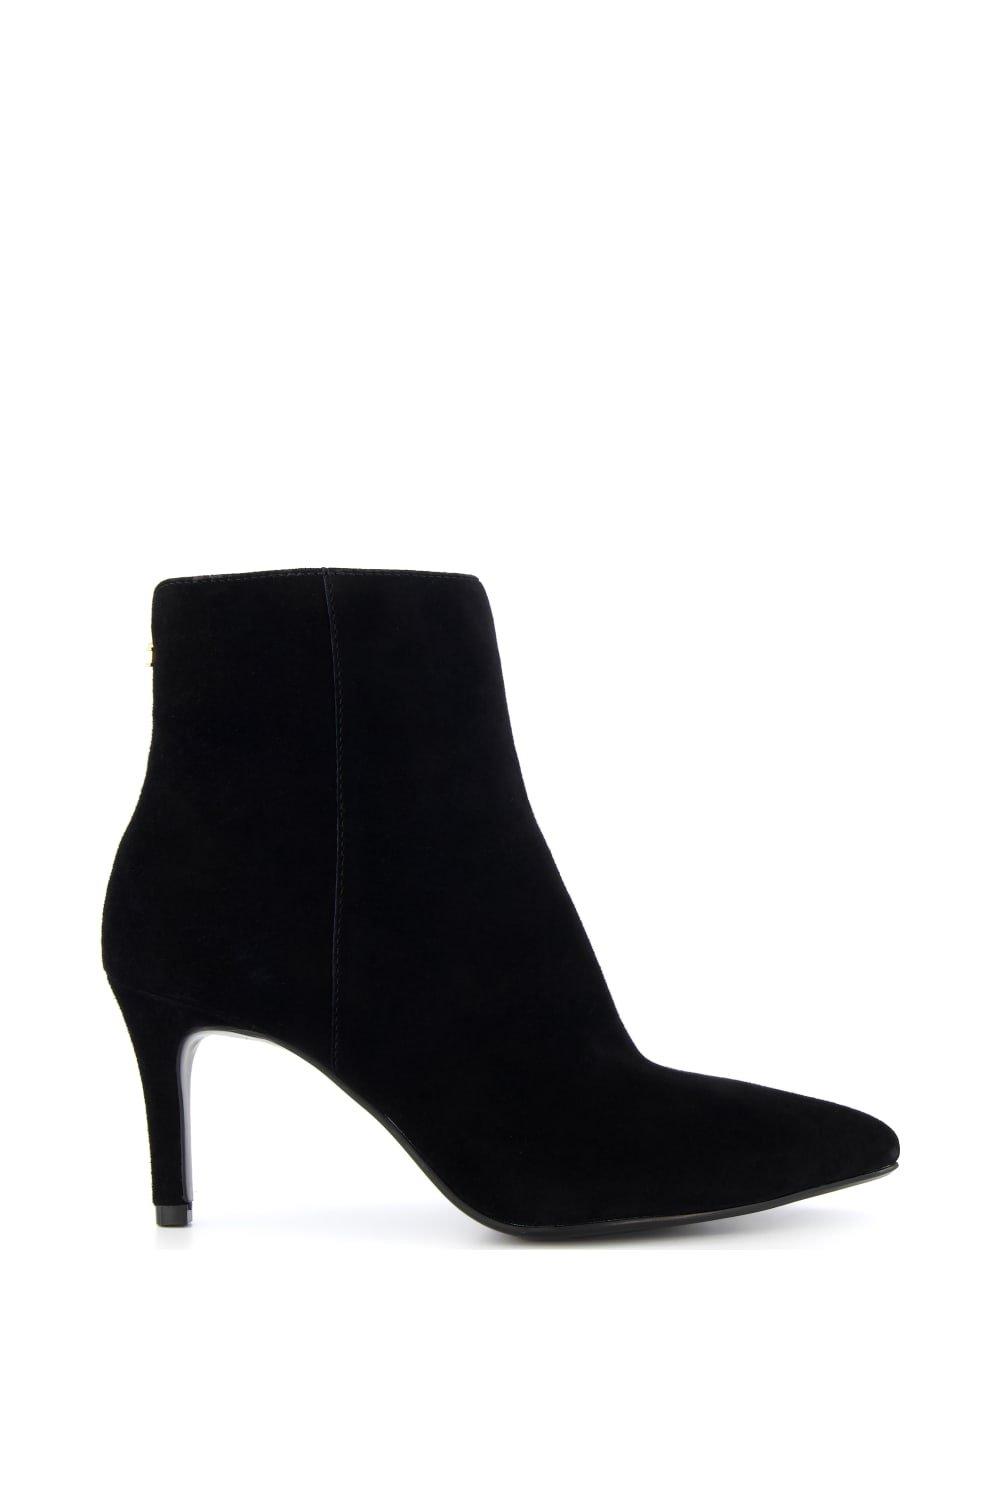 Boots | 'Obsessive 2' Suede Ankle Boots | Dune London